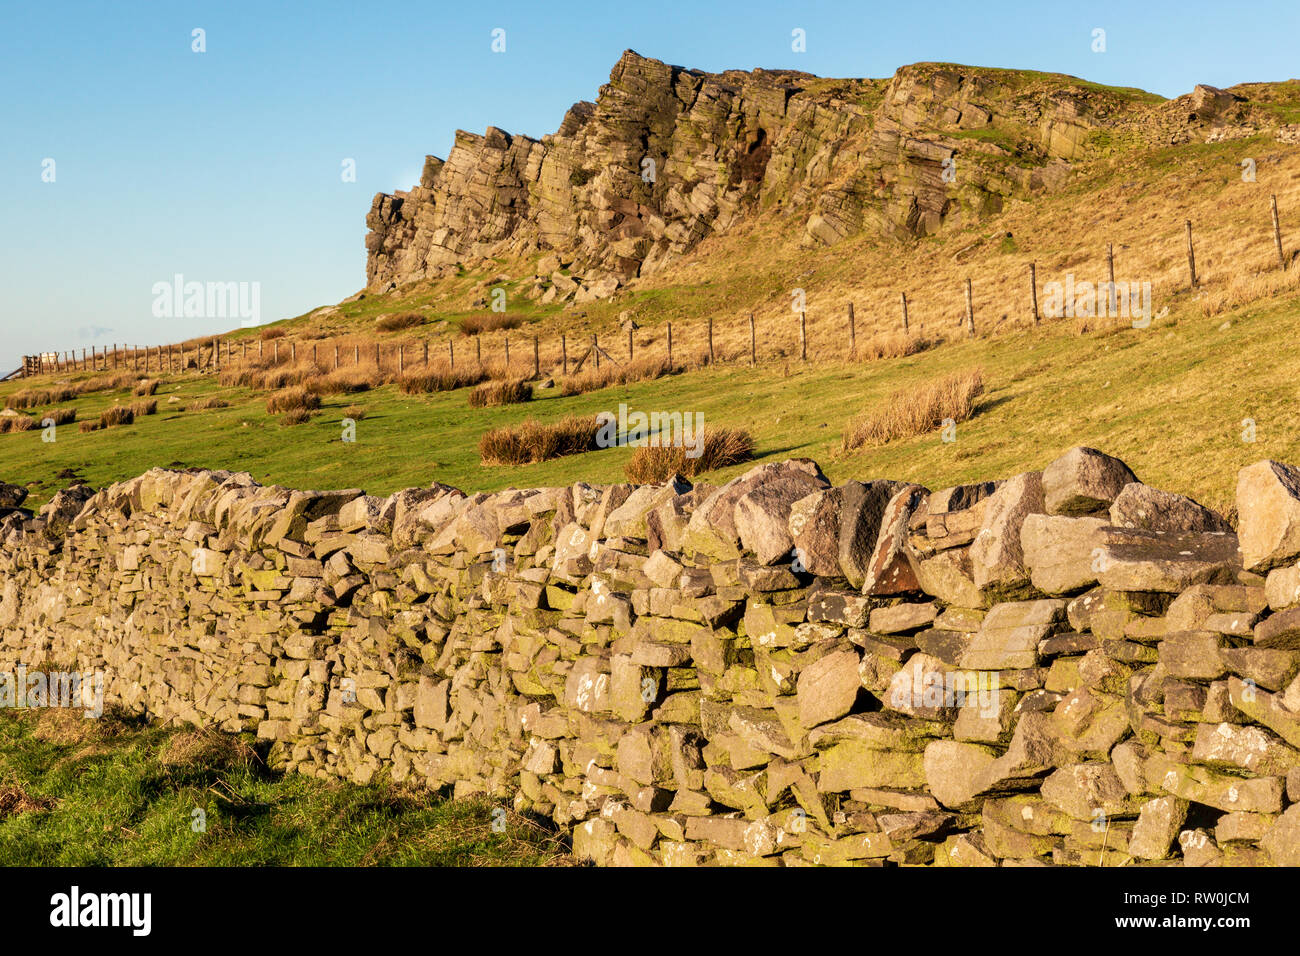 Windgather Rocks near Kettleshulme in the Derbyshire Peak District is a very popular climbing venue.  The sun is setting on the rocks. Stock Photo